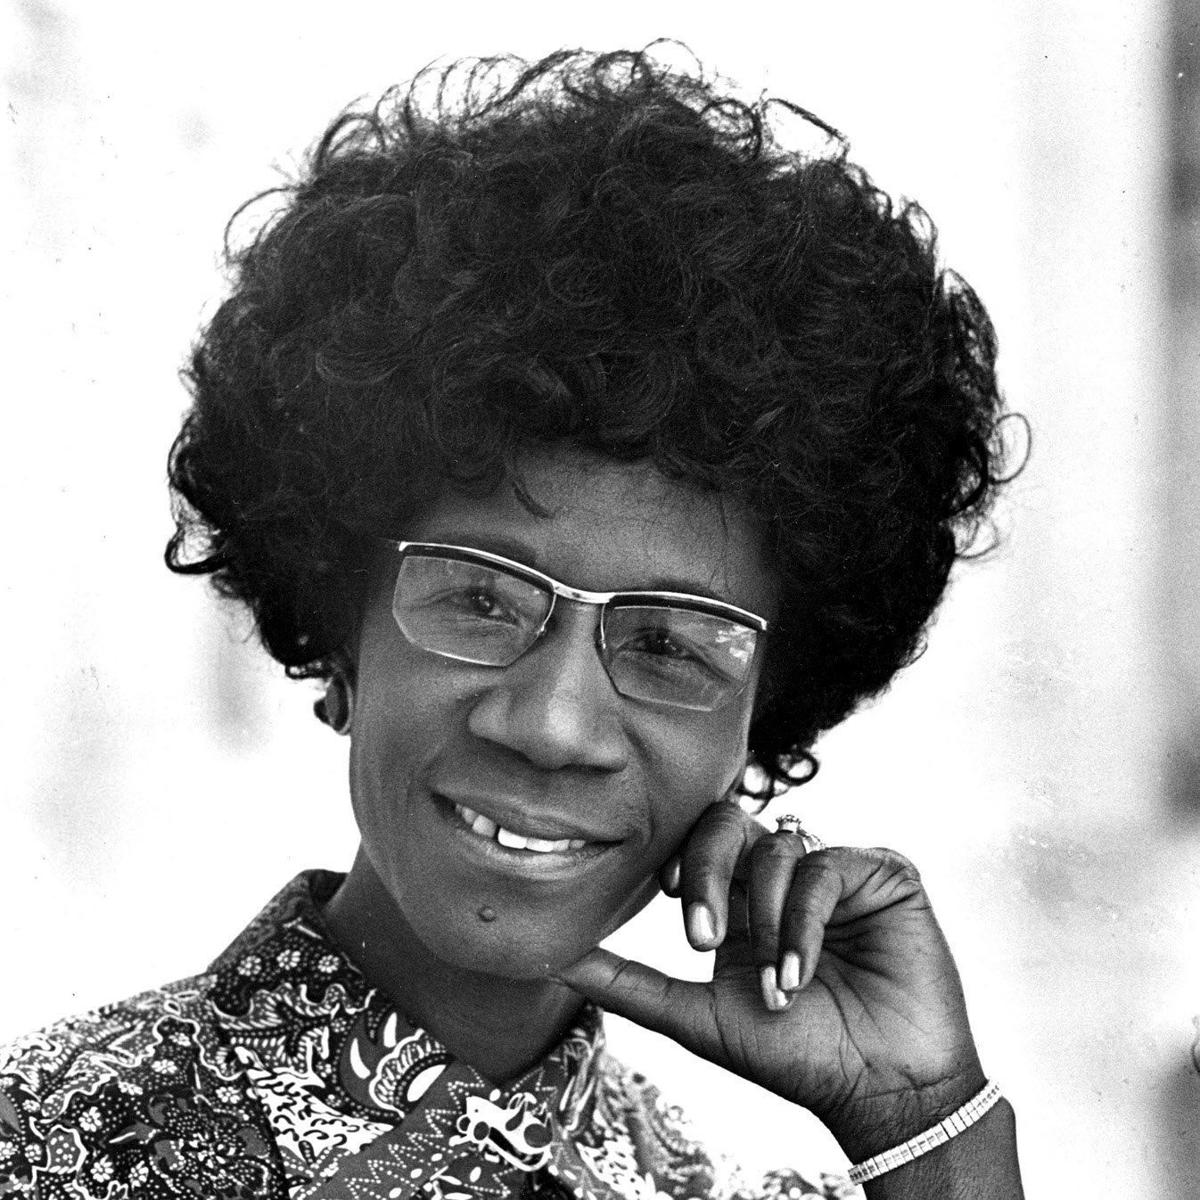 On Nov. 5, 1968, Shirley Chisholm became the first Black woman to be